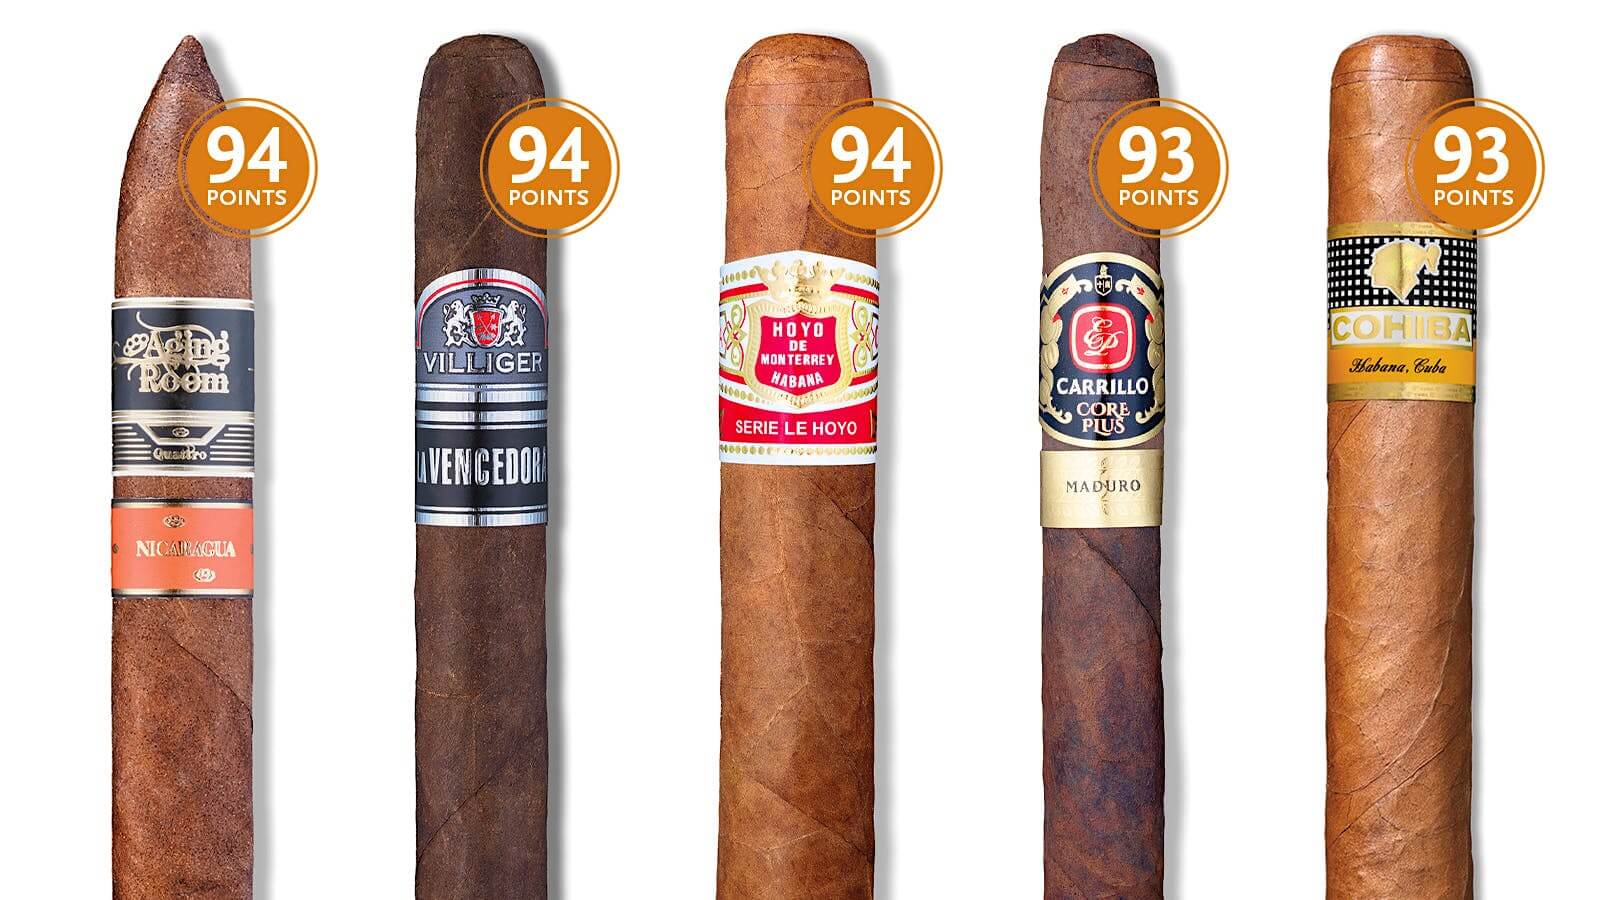 Top Cigars: Discover the Most Renowned and Esteemed Cigars in the World